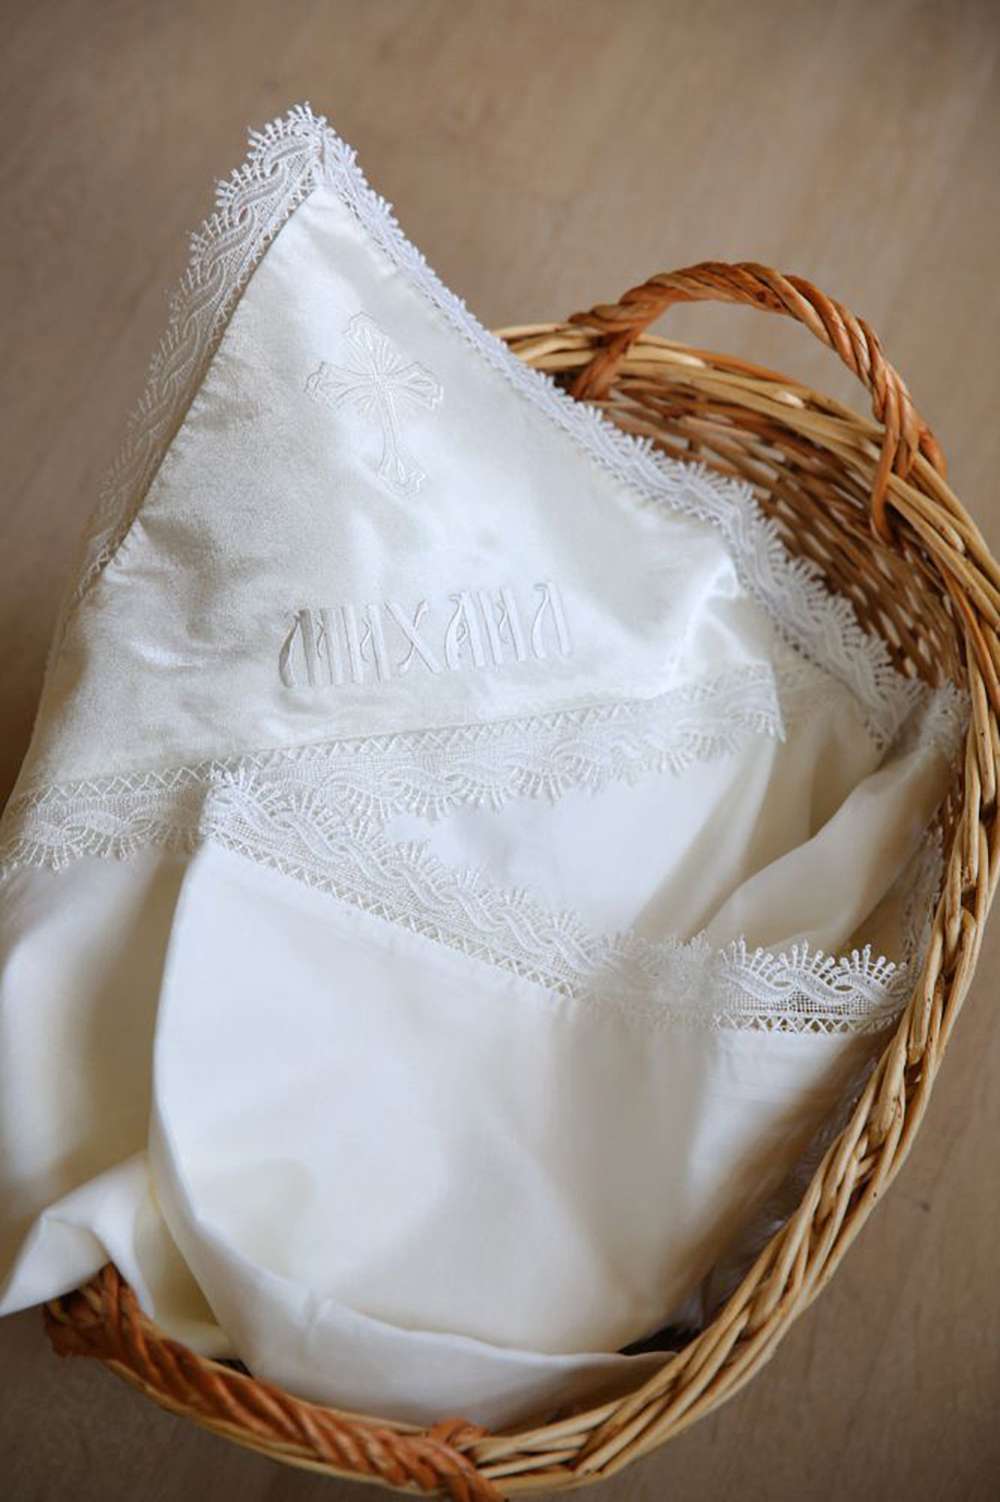 Baptism blanket with embroidered name made from church fabric